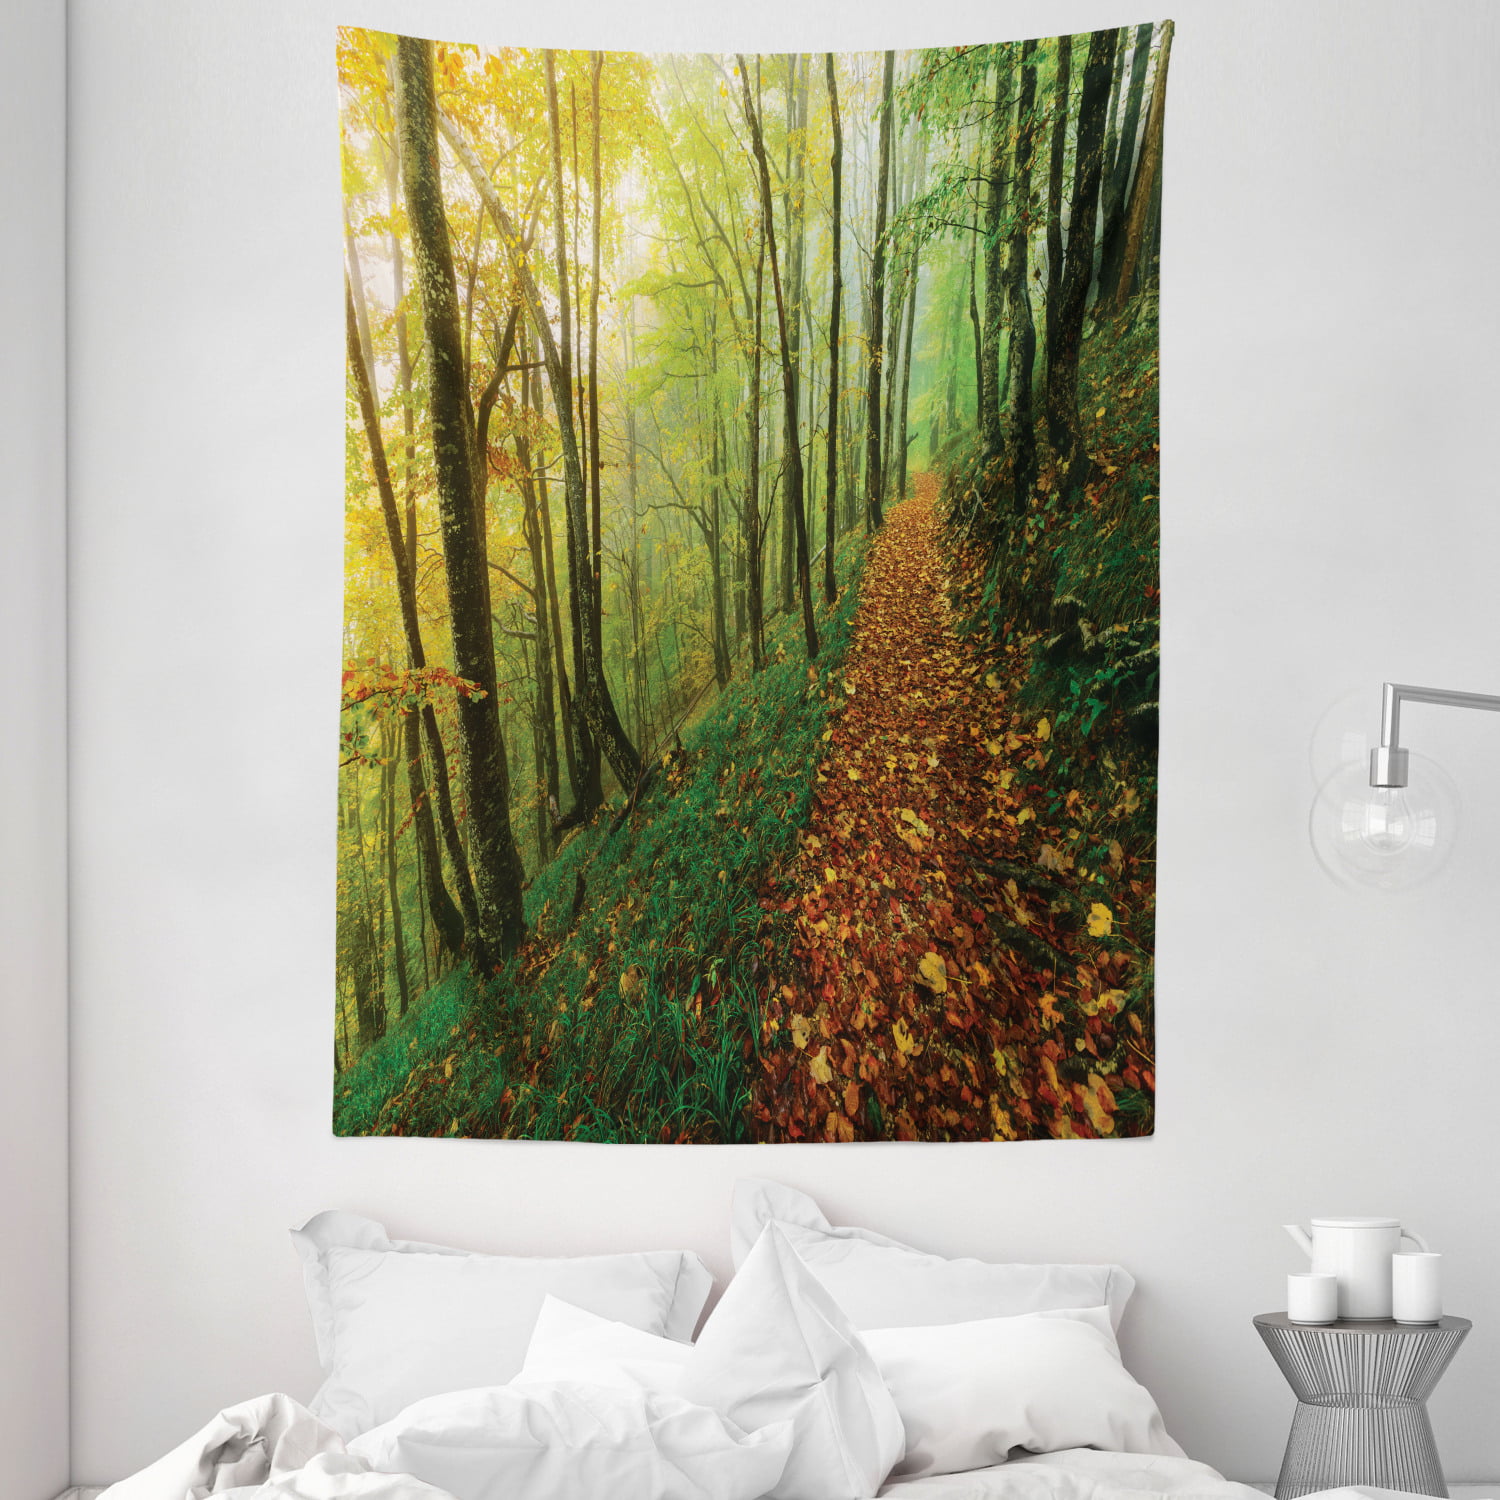 Art Green Forest Foggy Road Tapestry Wall Hanging Tapestry Livingroom Home Decor 